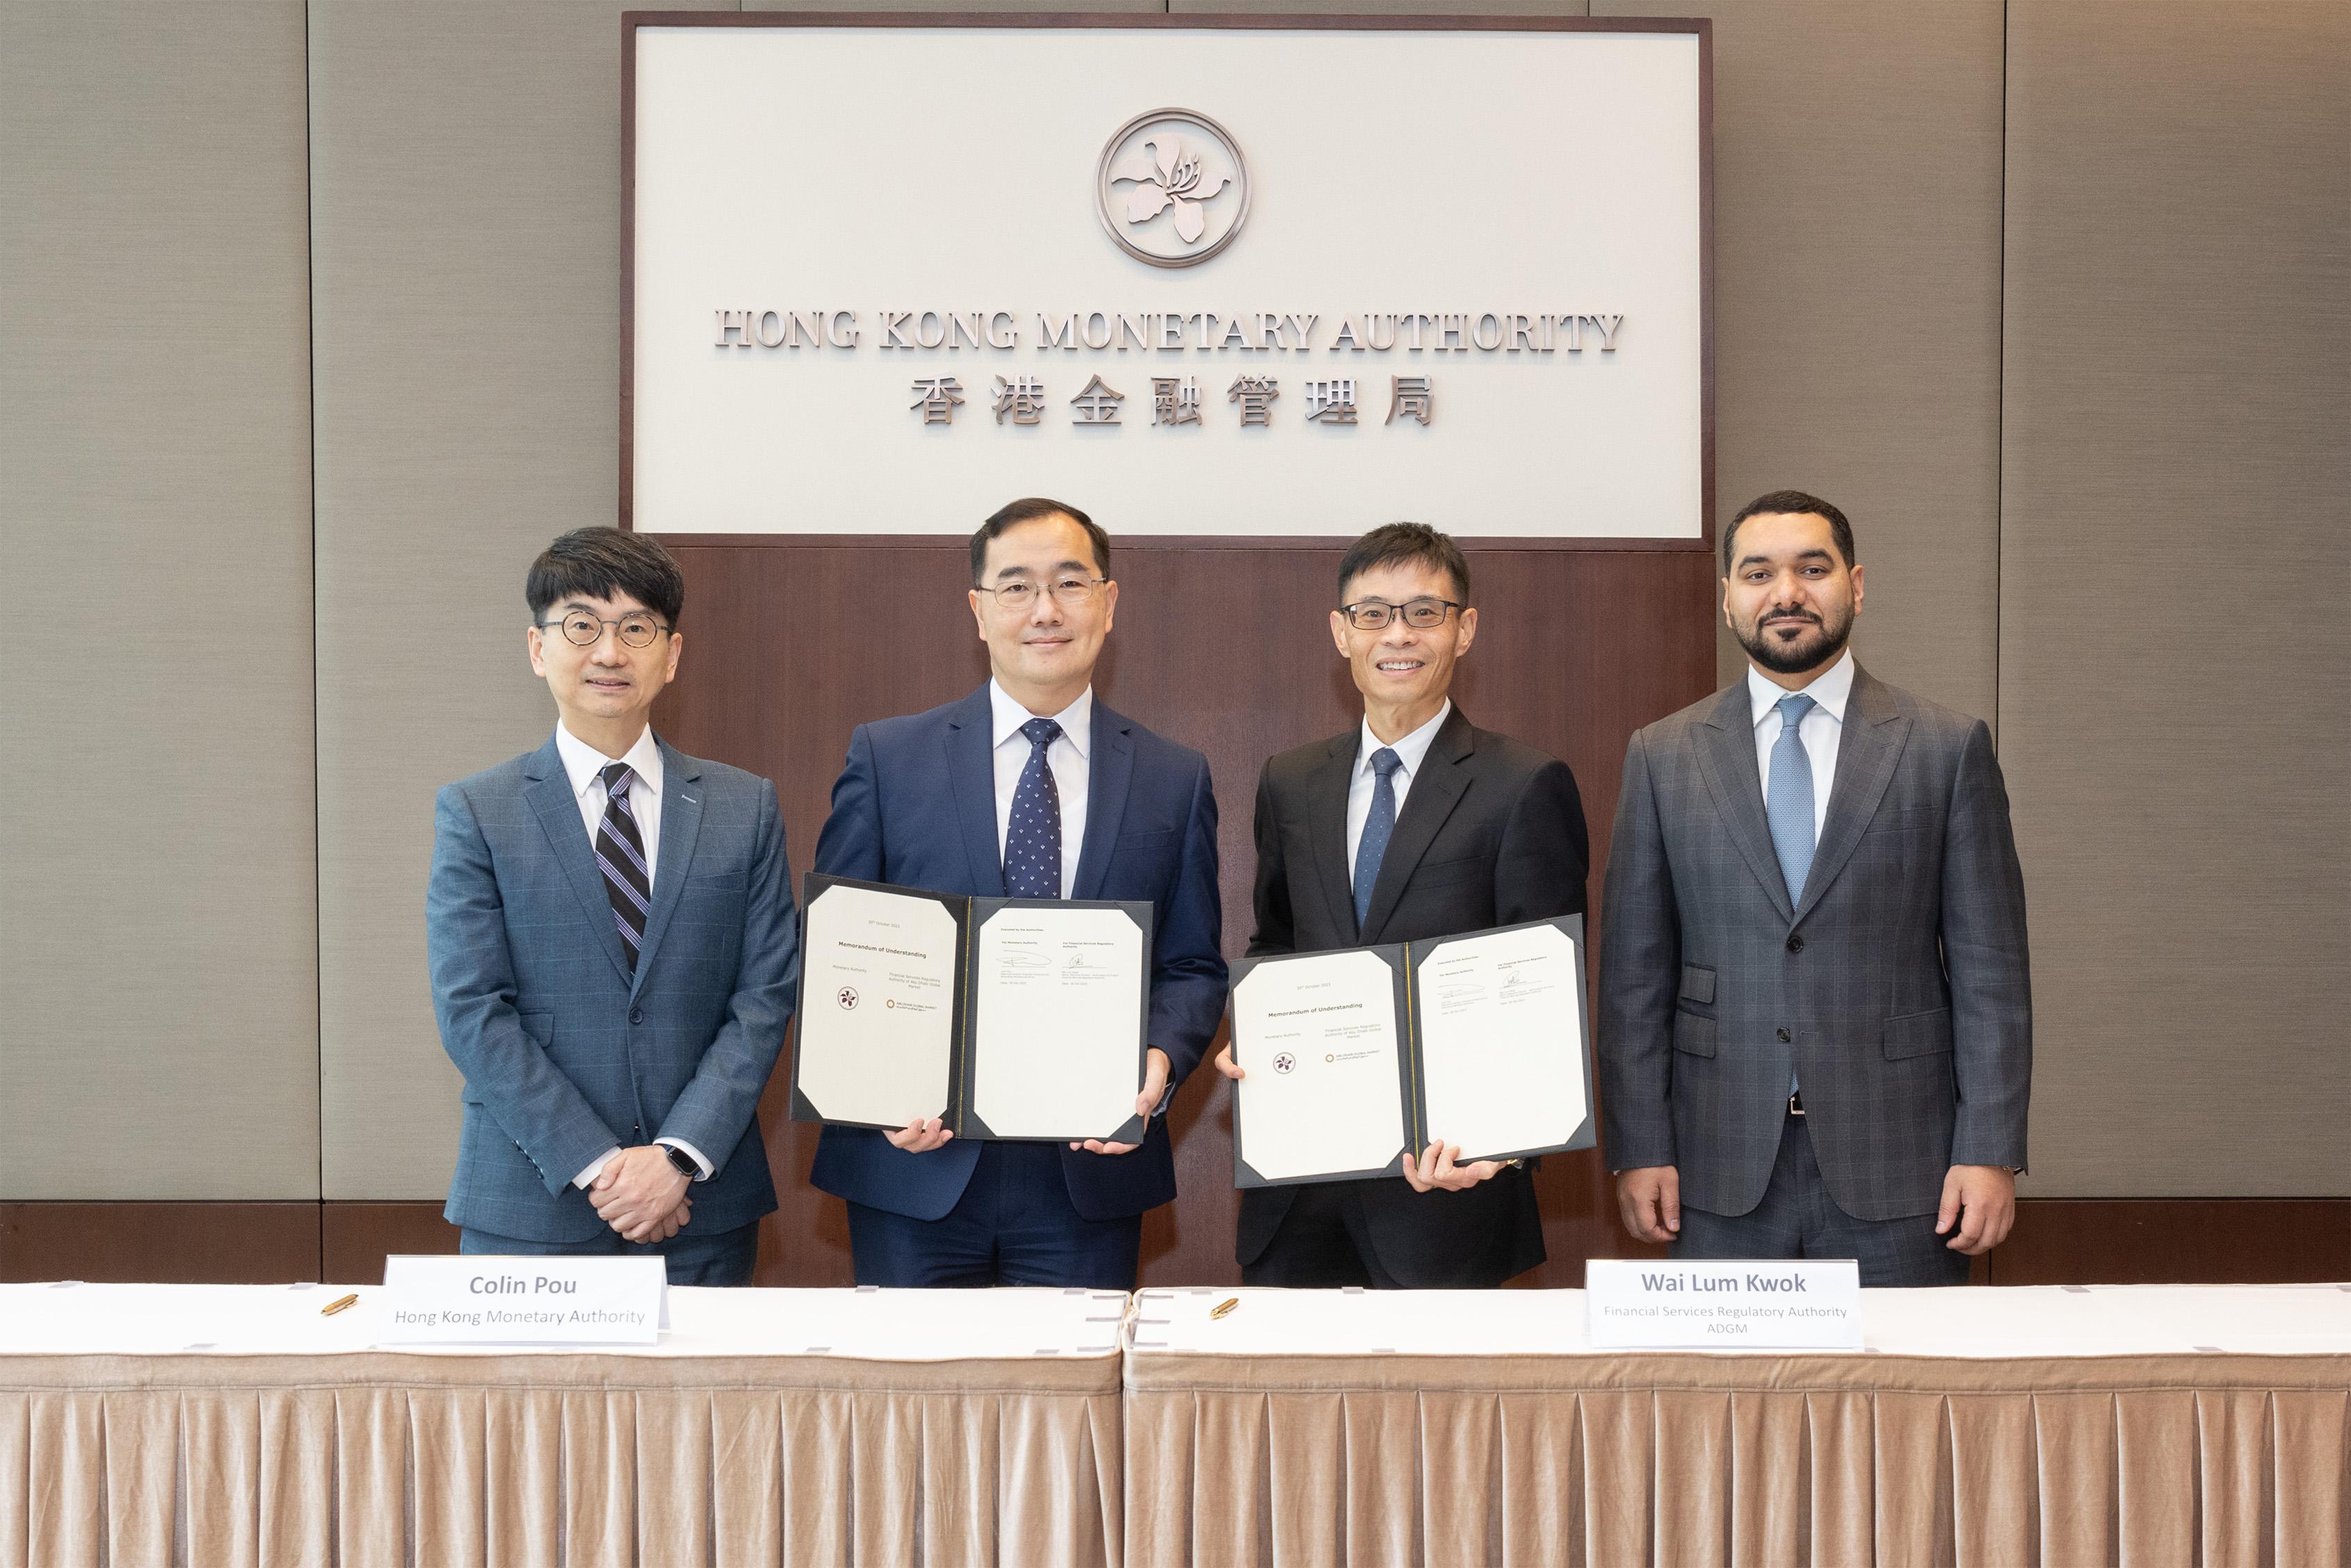 The Hong Kong Monetary Authority (HKMA) and the Financial Services Regulatory Authority (FSRA) of the Abu Dhabi Global Market (ADGM) jointly announced today (November 22) the exchange of a Memorandum of Understanding (MoU) to deepen the ongoing partnership on fintech between the two authorities. Photo shows the MoU signing ceremony is attended by the Head (Financial Market Infrastructure Service) of the HKMA, Mr Nelson Chow (first left); the Executive Director (Financial Infrastructure) of the HKMA, Mr Colin Pou (second left); the Senior Executive Director - Authorisation & Fintech of the FSRA, Mr Kwok Wai-lum (third left); and the Consul-General of the United Arab Emirates in the Hong Kong Special Administrative Region, H.E. Shaikh Saoud Al Mualla (forth left).